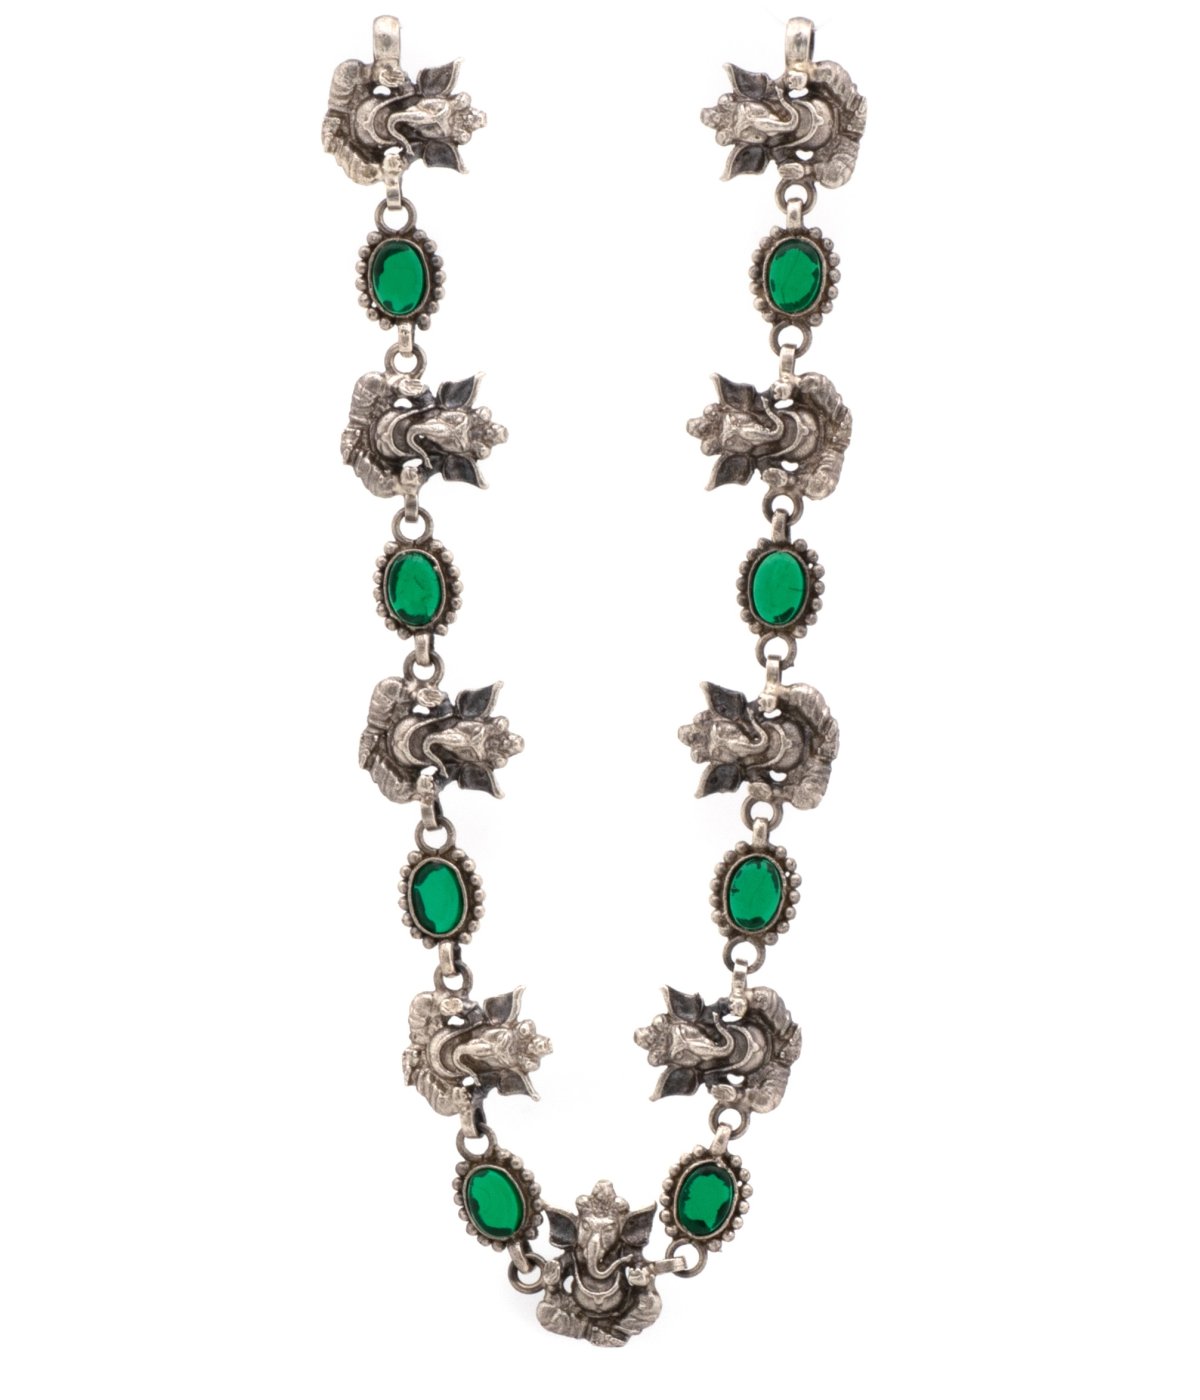 Stylish 92.5 Sterling Silver Oxidised necklace floral and vinayagar design with emerald stone